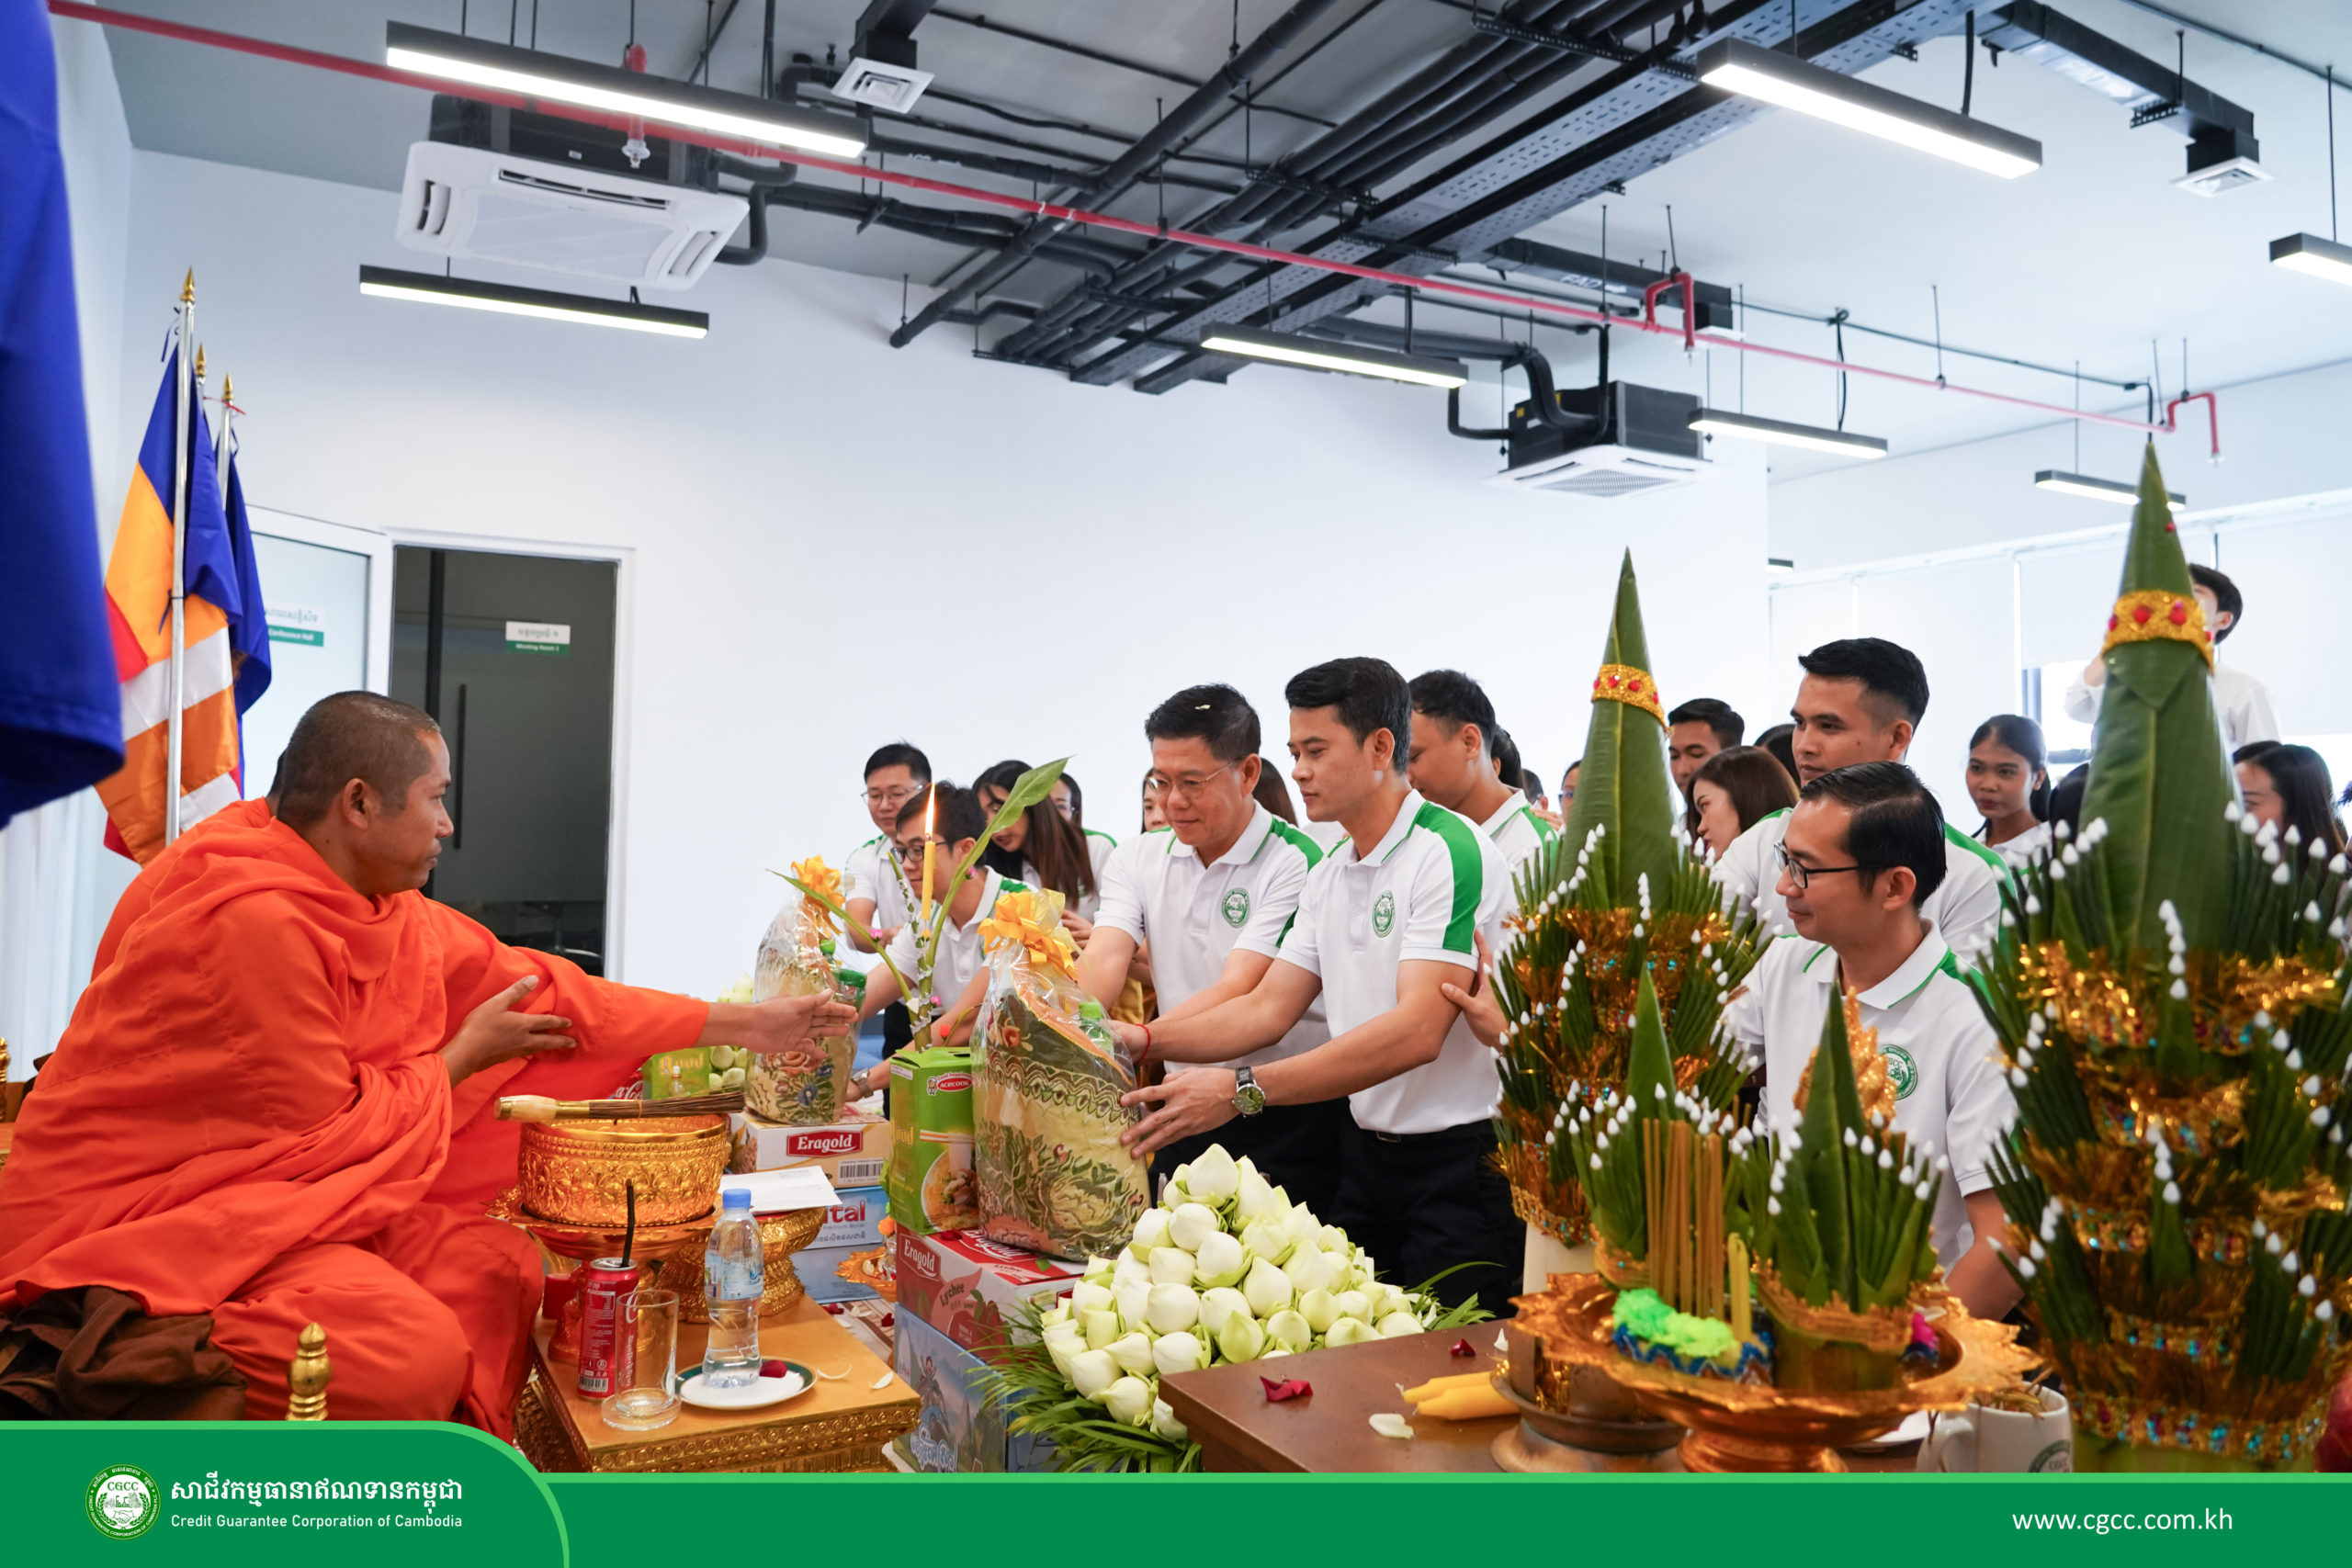 Blessing Ceremony to Welcome the Upcoming Pchum Ben Festival